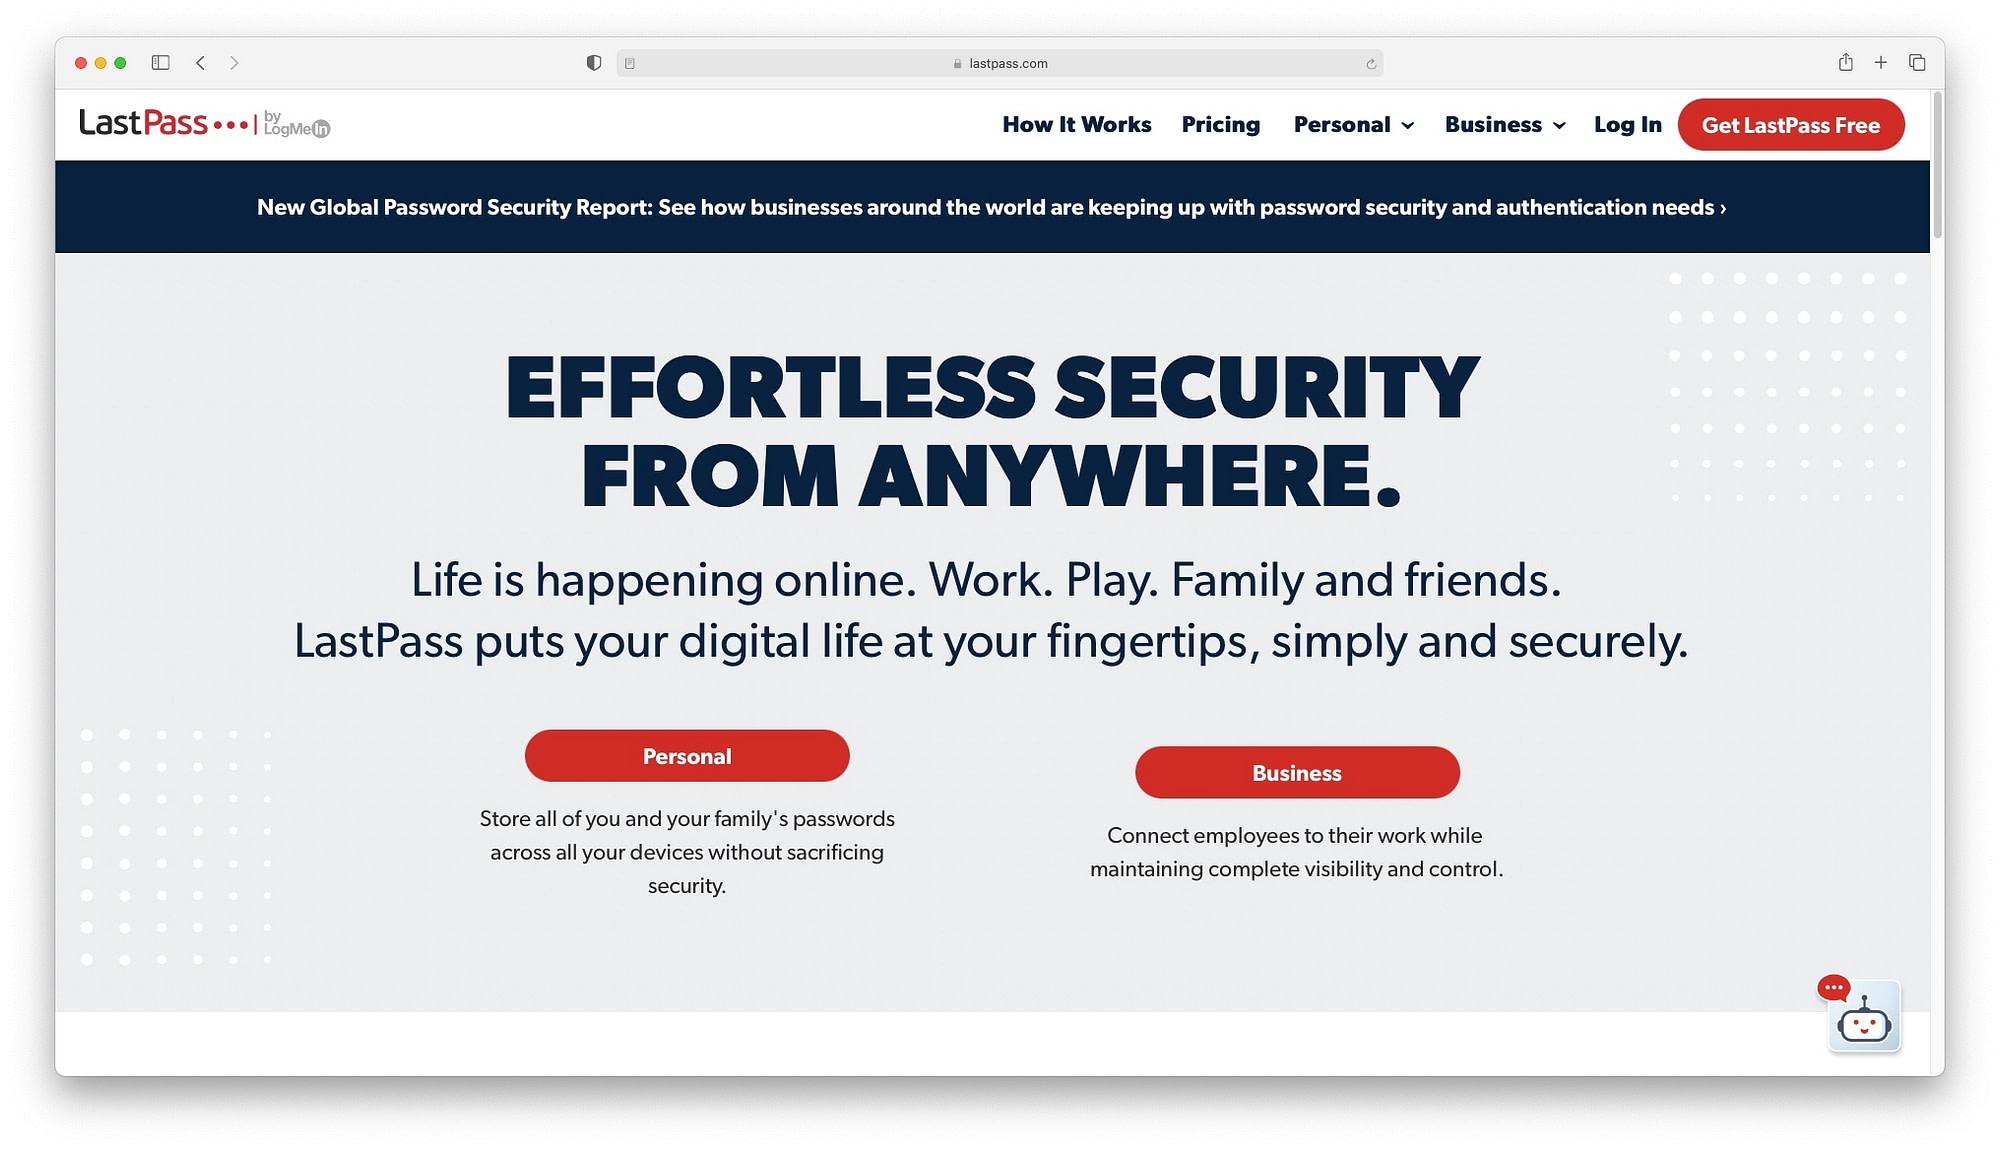 Lastpass is one of the best password managers